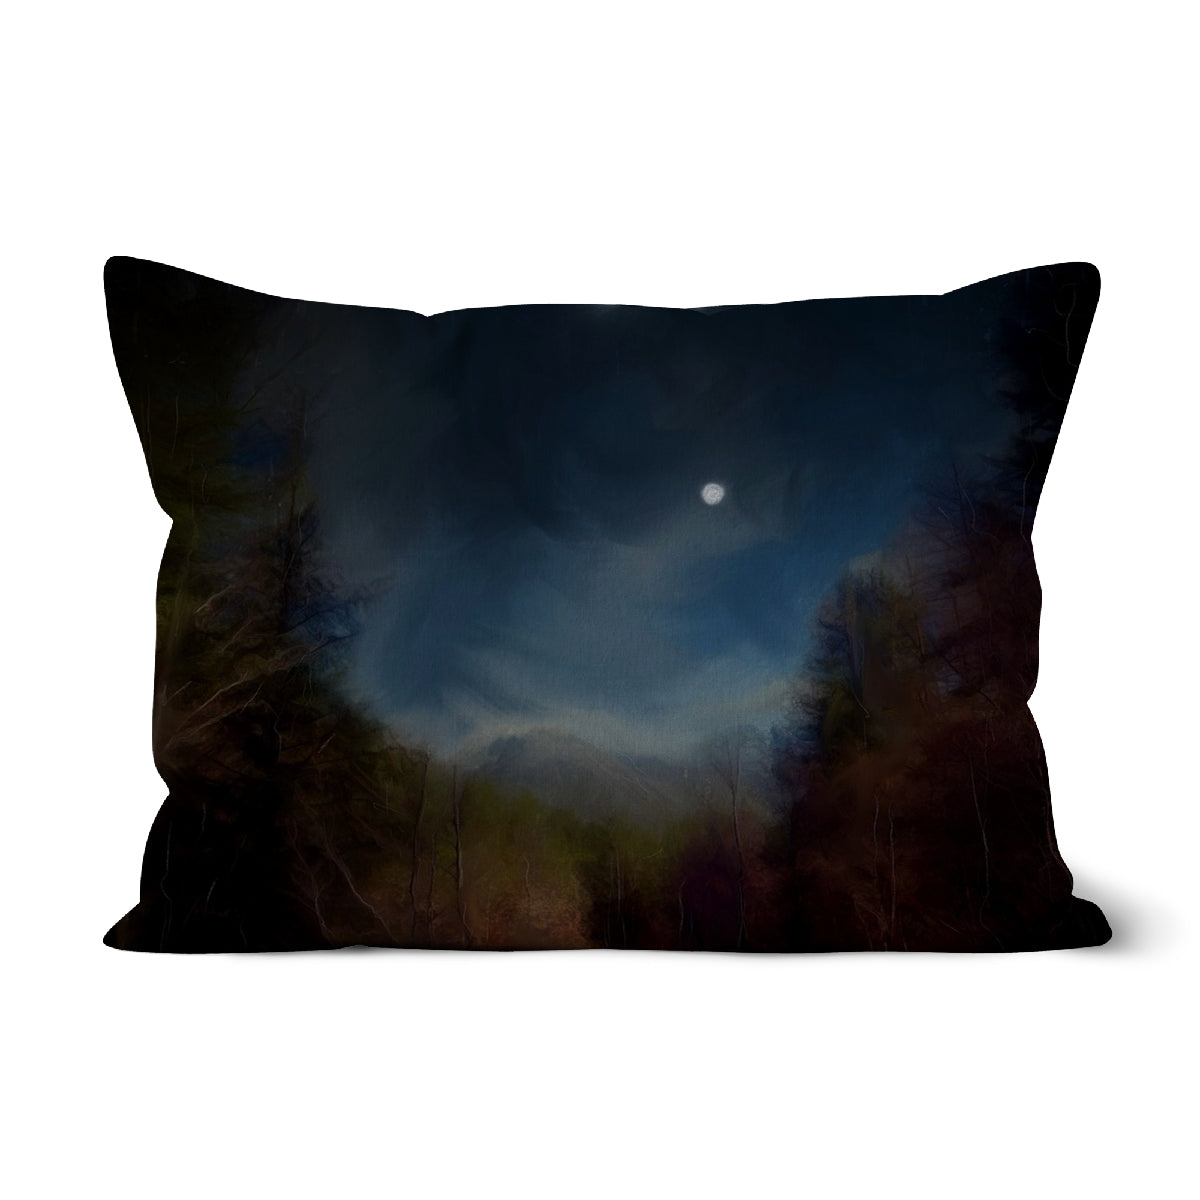 Glencoe Lochan Moonlight Art Gifts Cushion-Cushions-Scottish Lochs & Mountains Art Gallery-Faux Suede-19"x13"-Paintings, Prints, Homeware, Art Gifts From Scotland By Scottish Artist Kevin Hunter